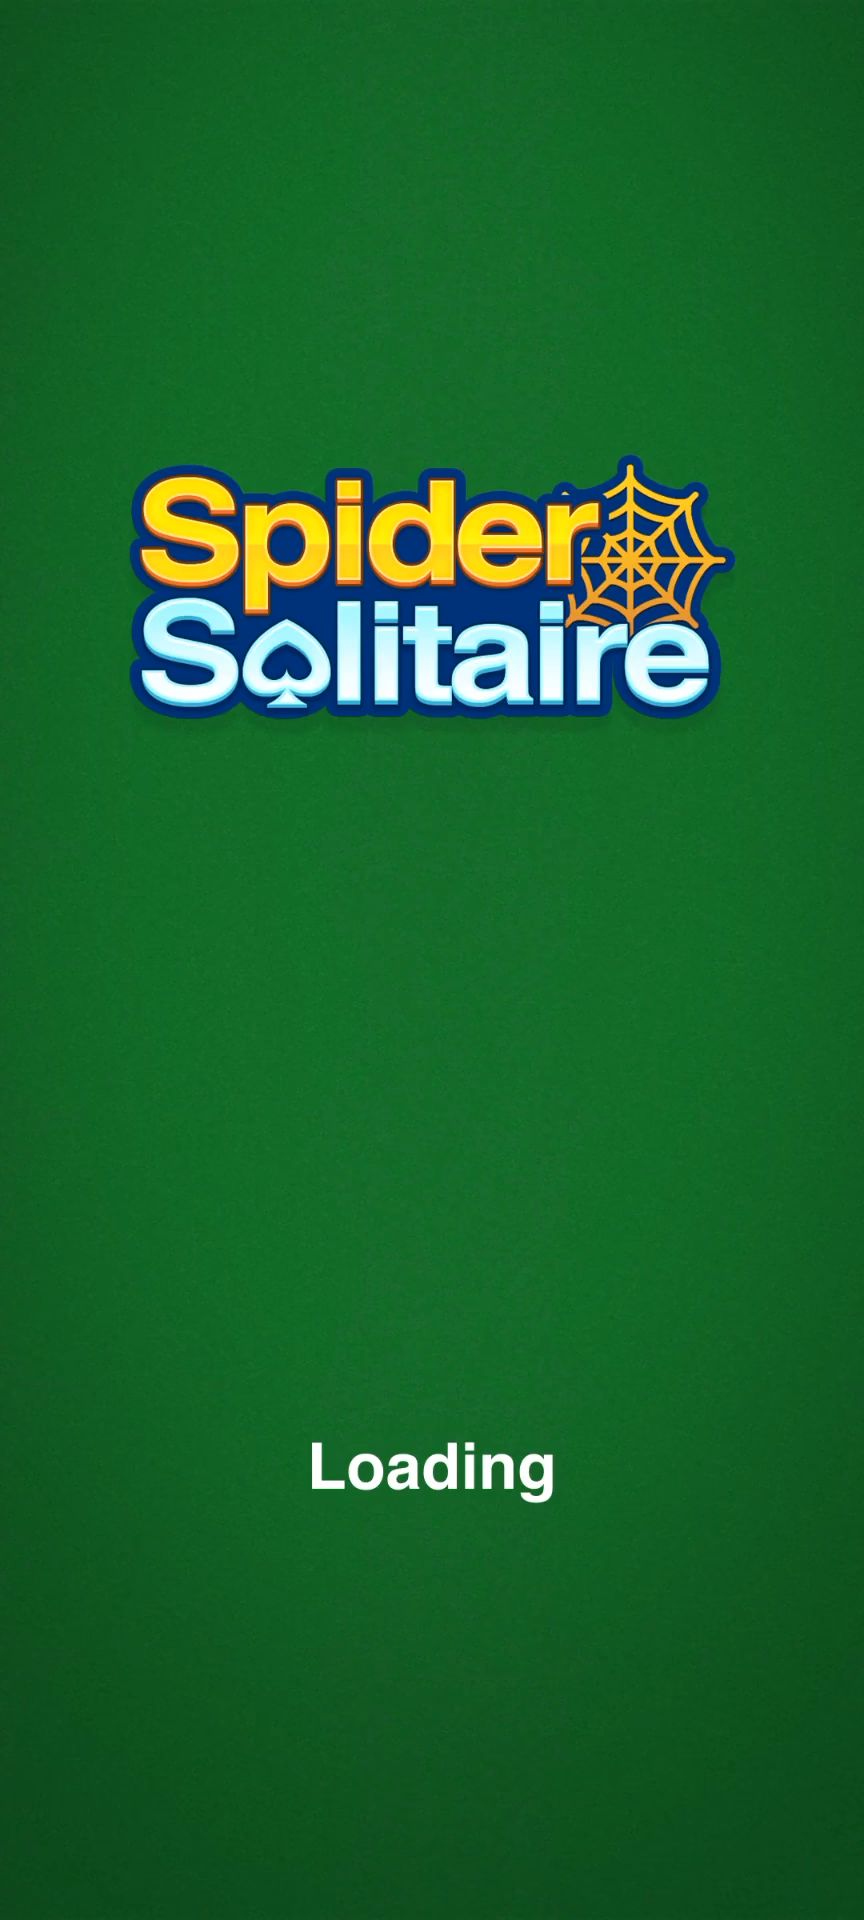 Descargar Spider Solitaire Classic para Android mob.org